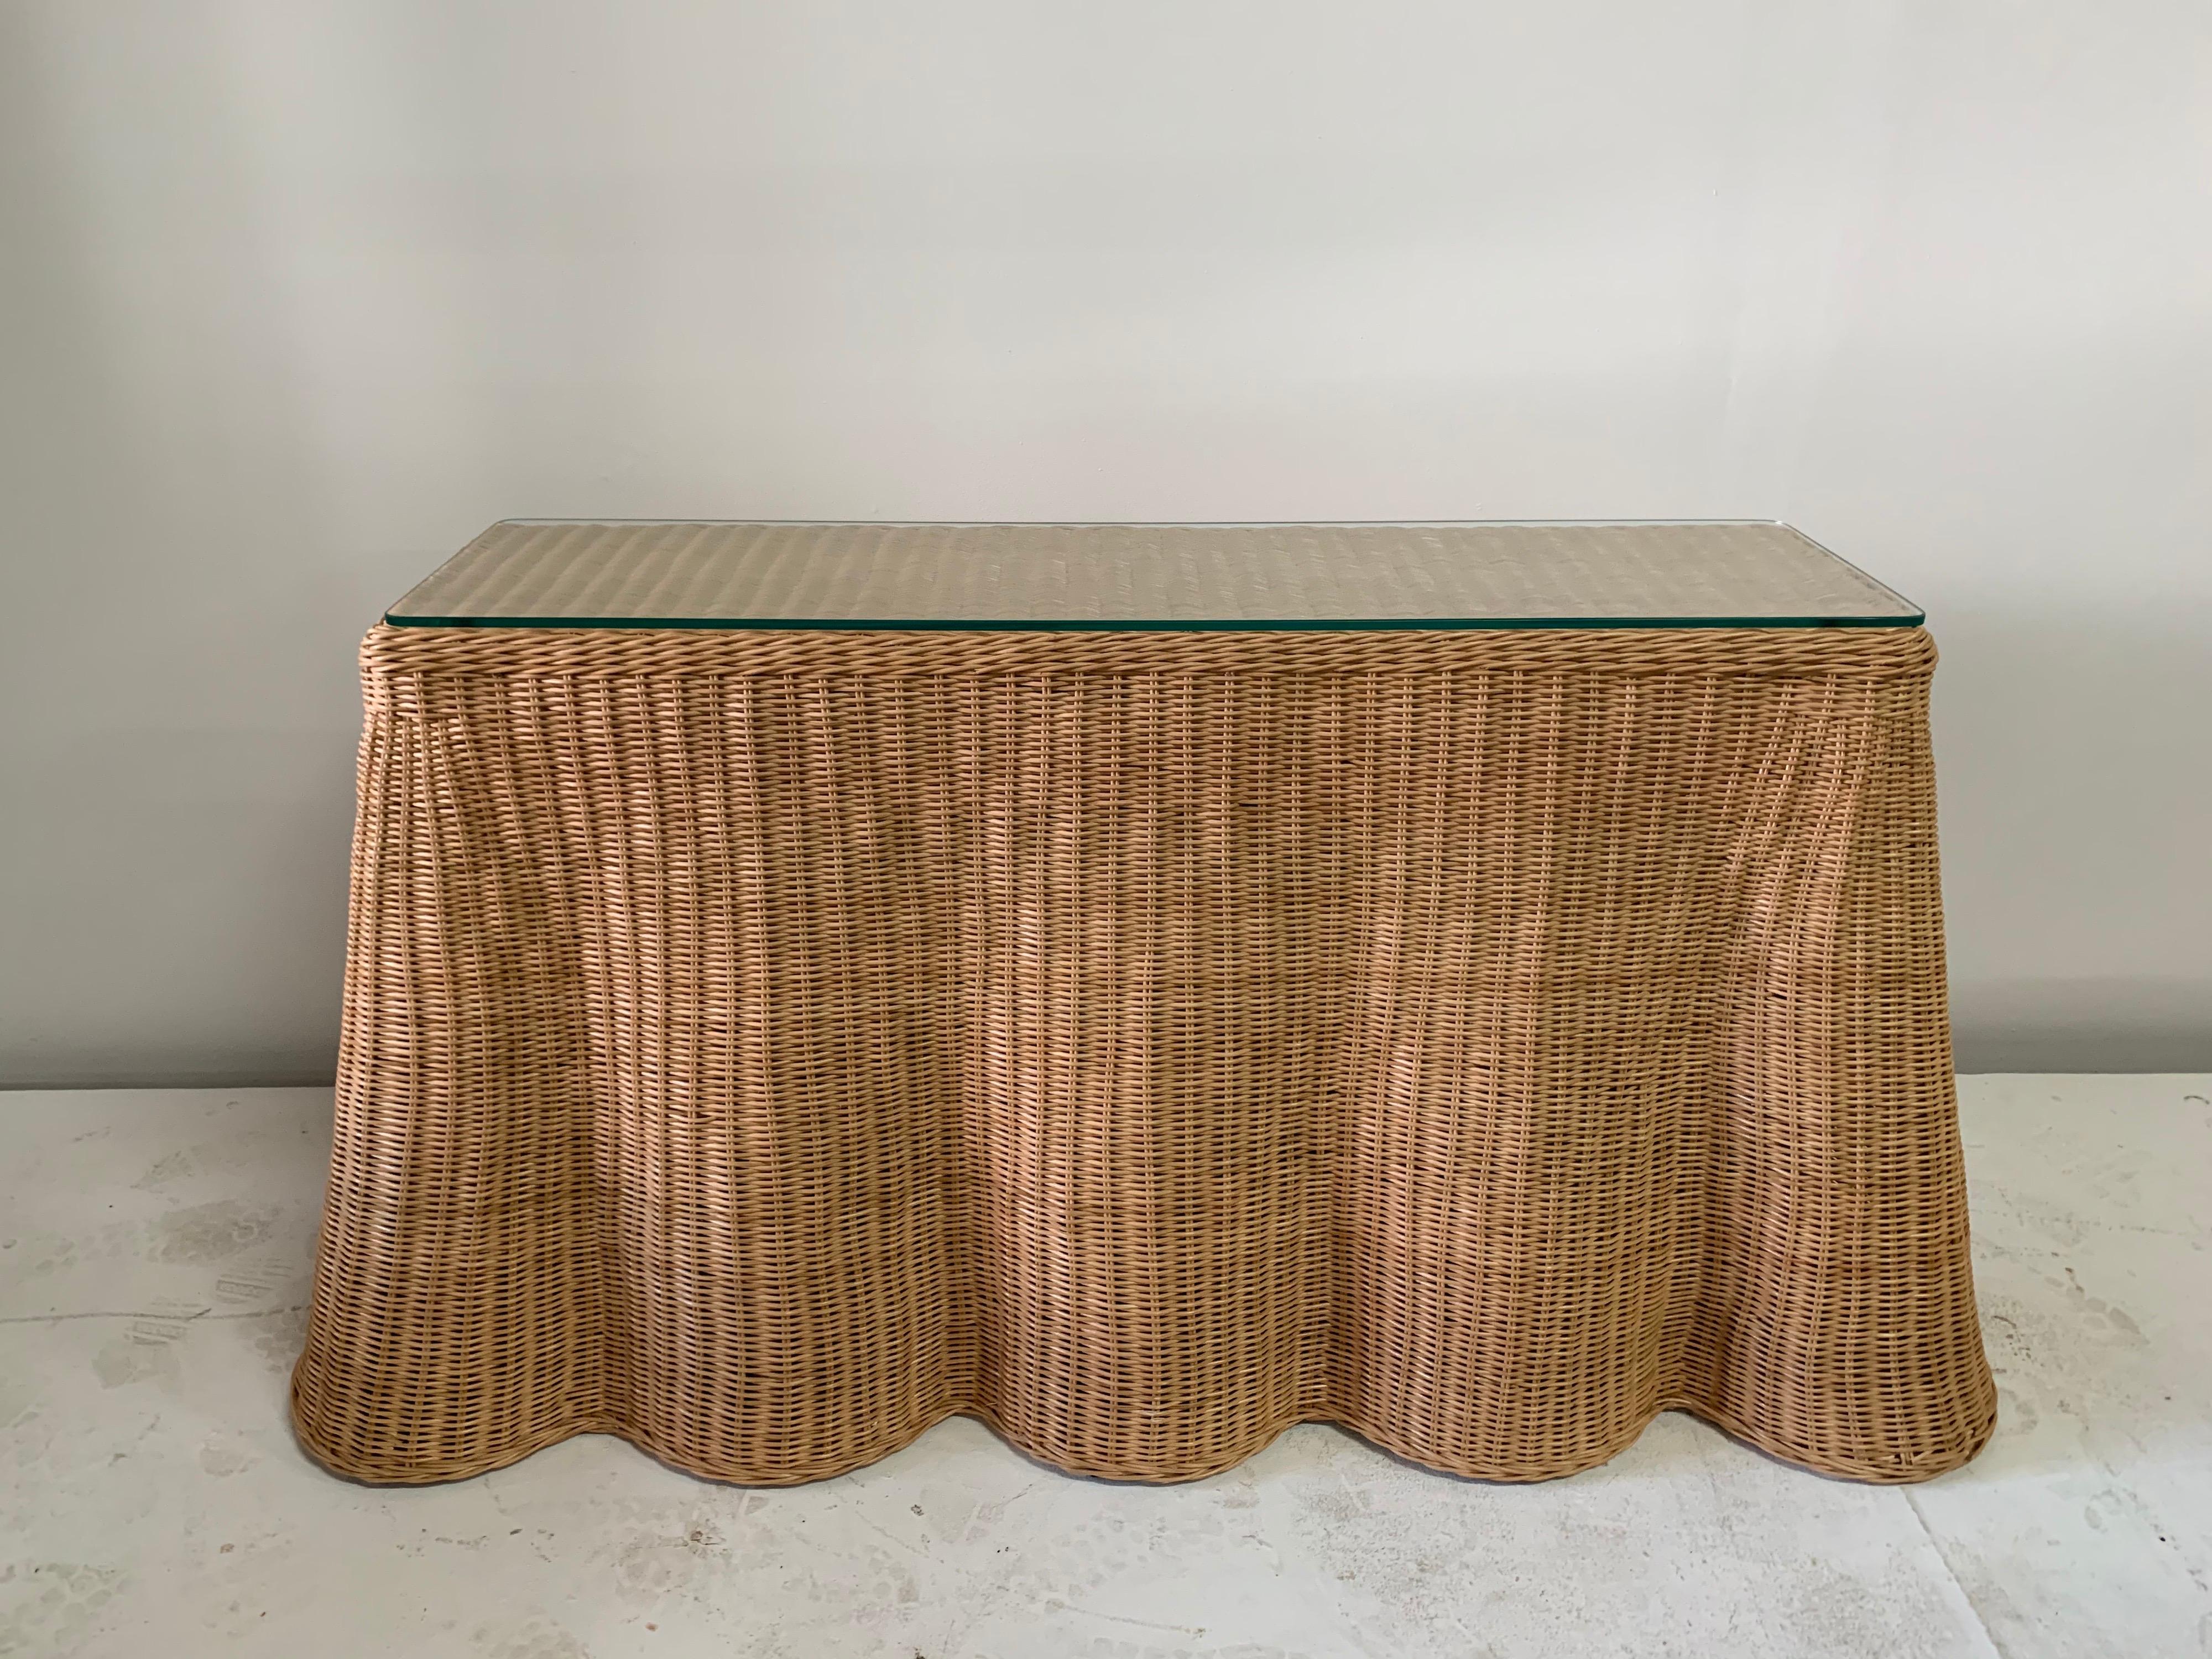 Finely crafted, this vintage draped wicker console table is one of the largest we have seen and sold. Bottom/base has been covered in black fabric, as originally found and glass protector top as well.

Note: Dimensions of the wicker table listed